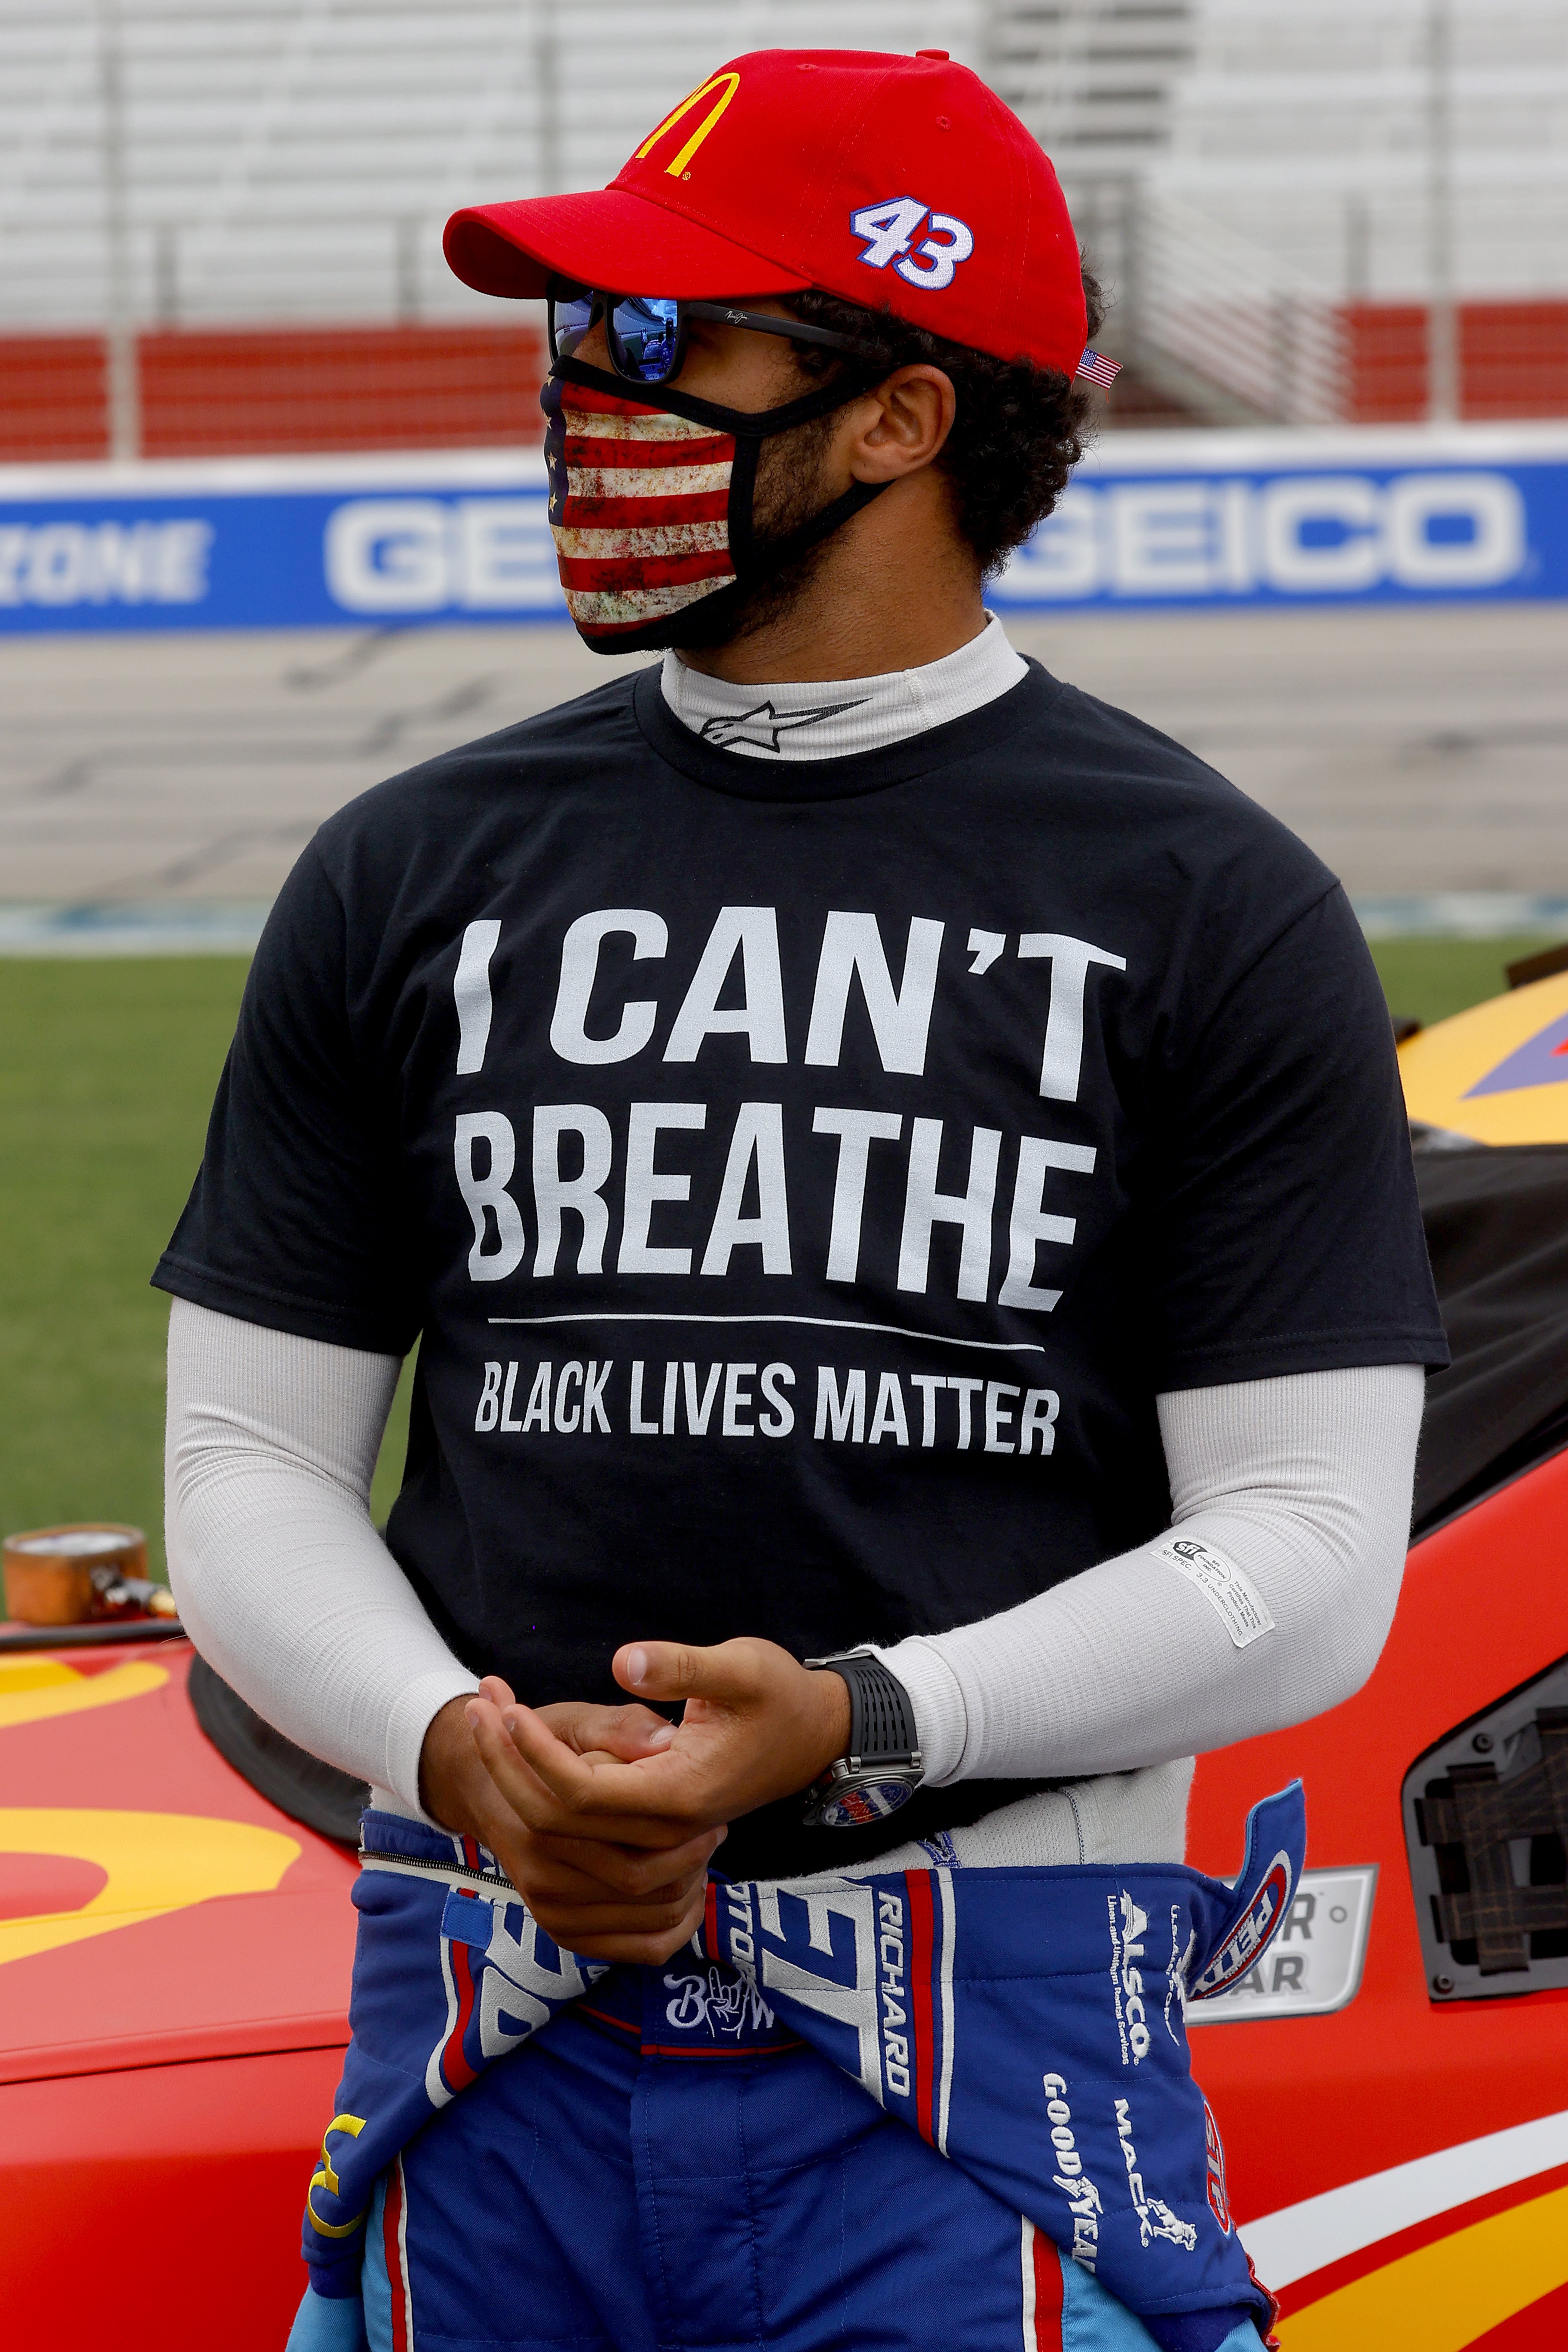 Top NASCAR racer Bubba Wallace donned a statement shirt in solidarity with the black community. | Photo: Getty Images